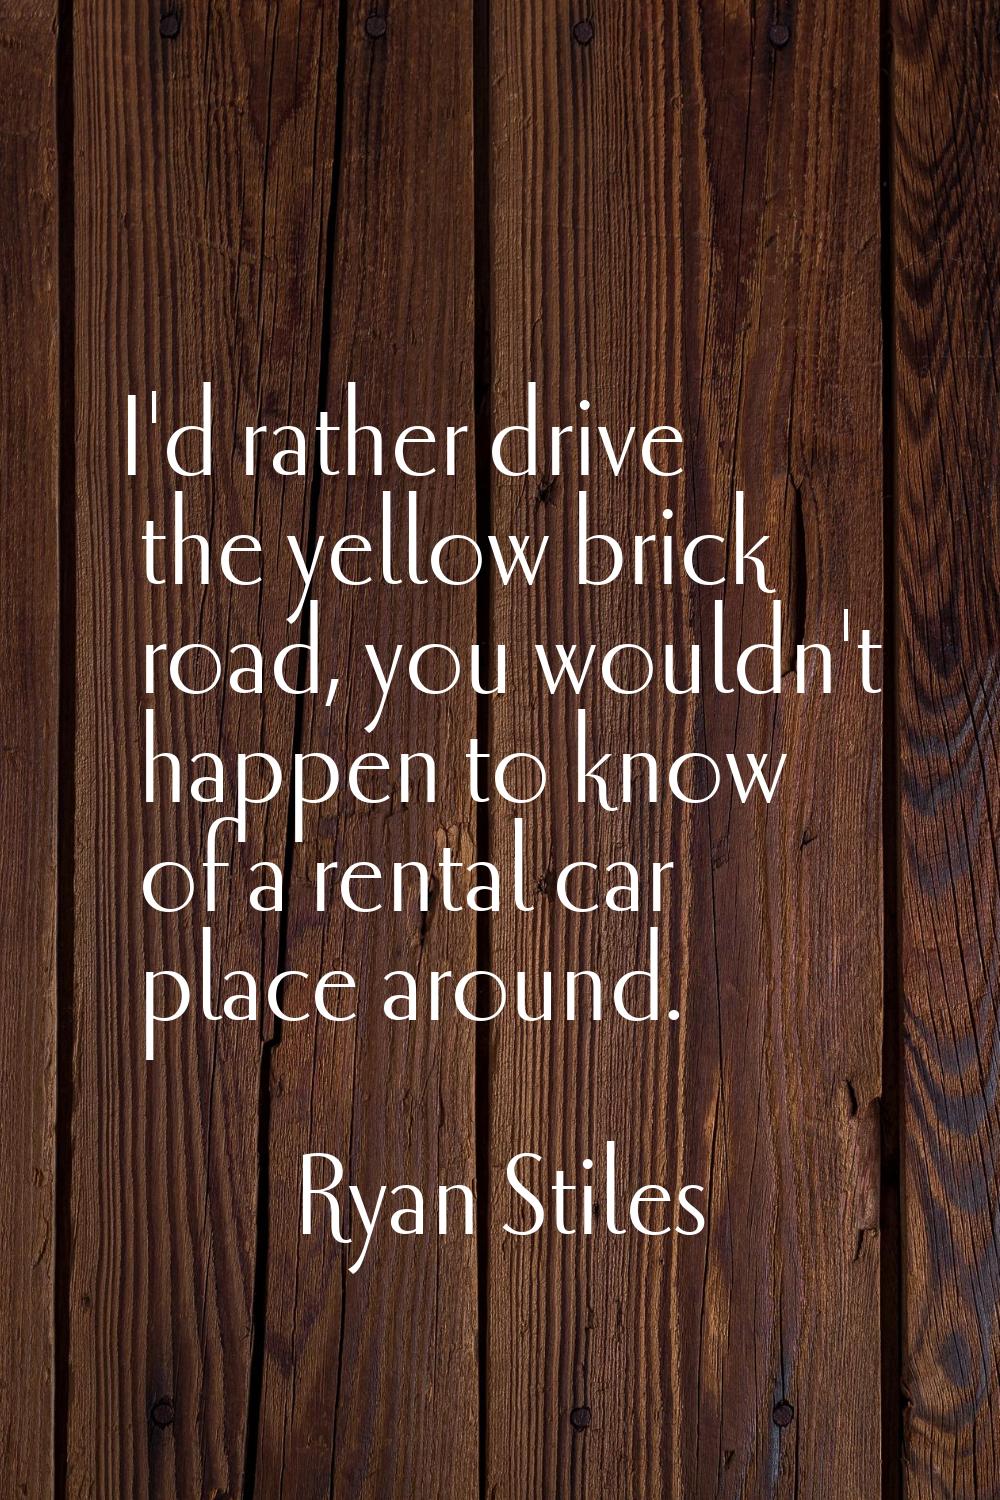 I'd rather drive the yellow brick road, you wouldn't happen to know of a rental car place around.